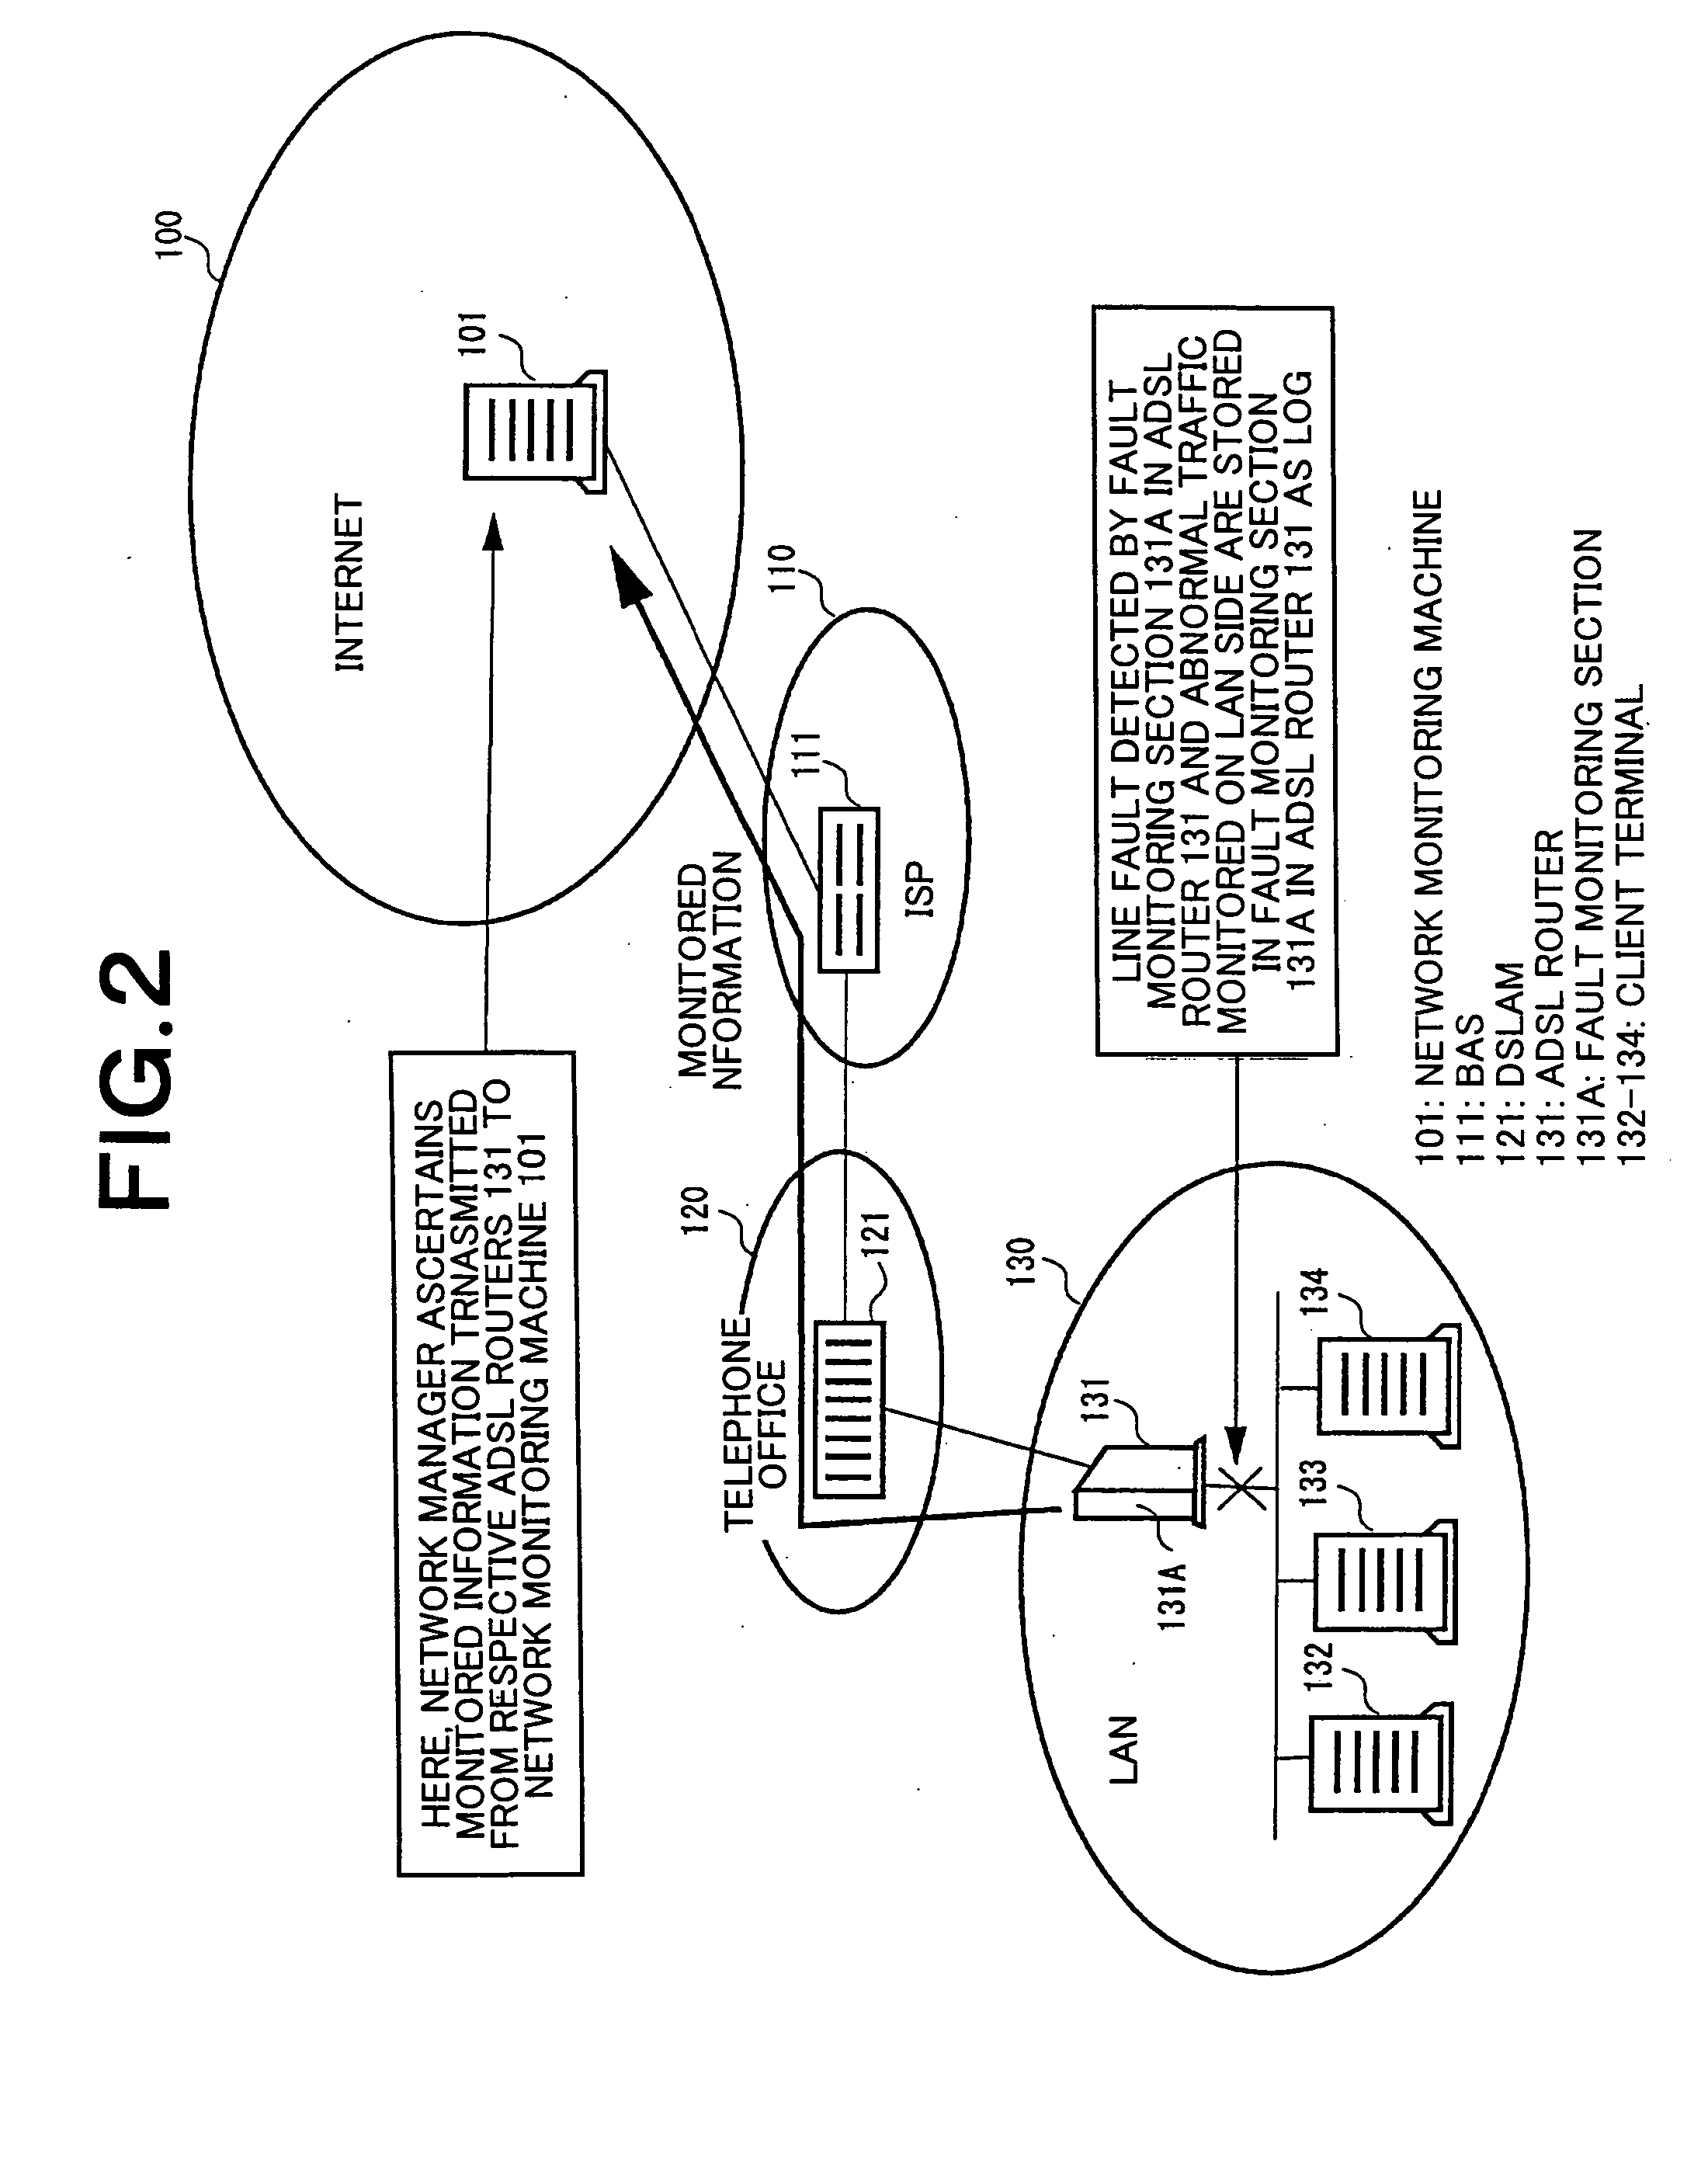 Load distribution type network fault monitoring system and method of broadband router